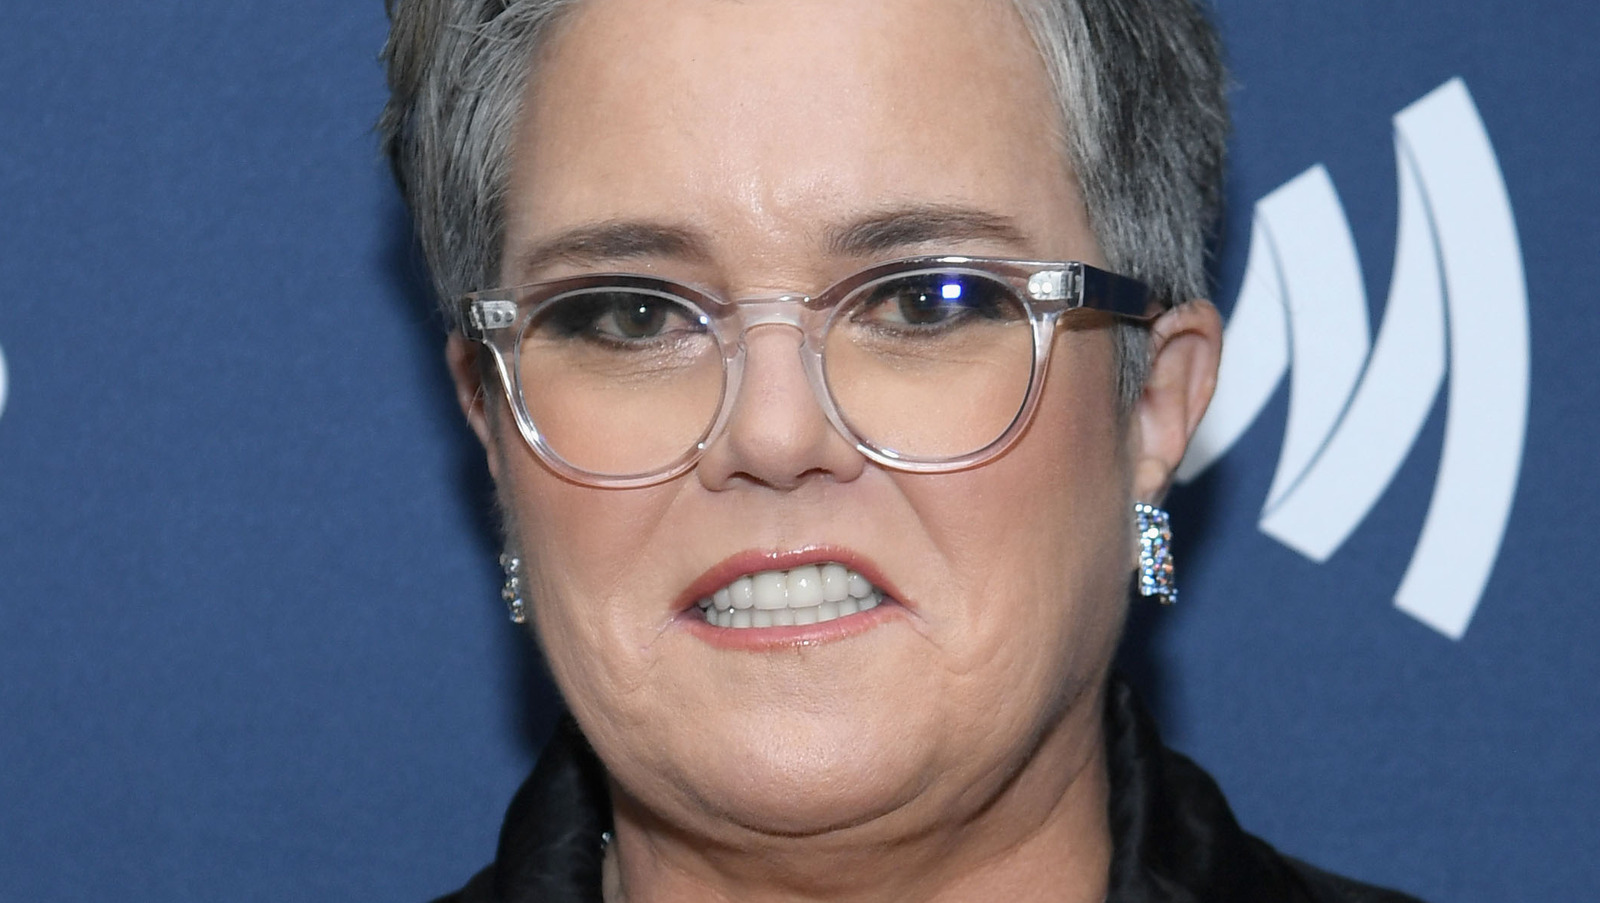 Rosie O’Donnell Shares Details About Her ‘Angel’ Daughter’s Autism Journey